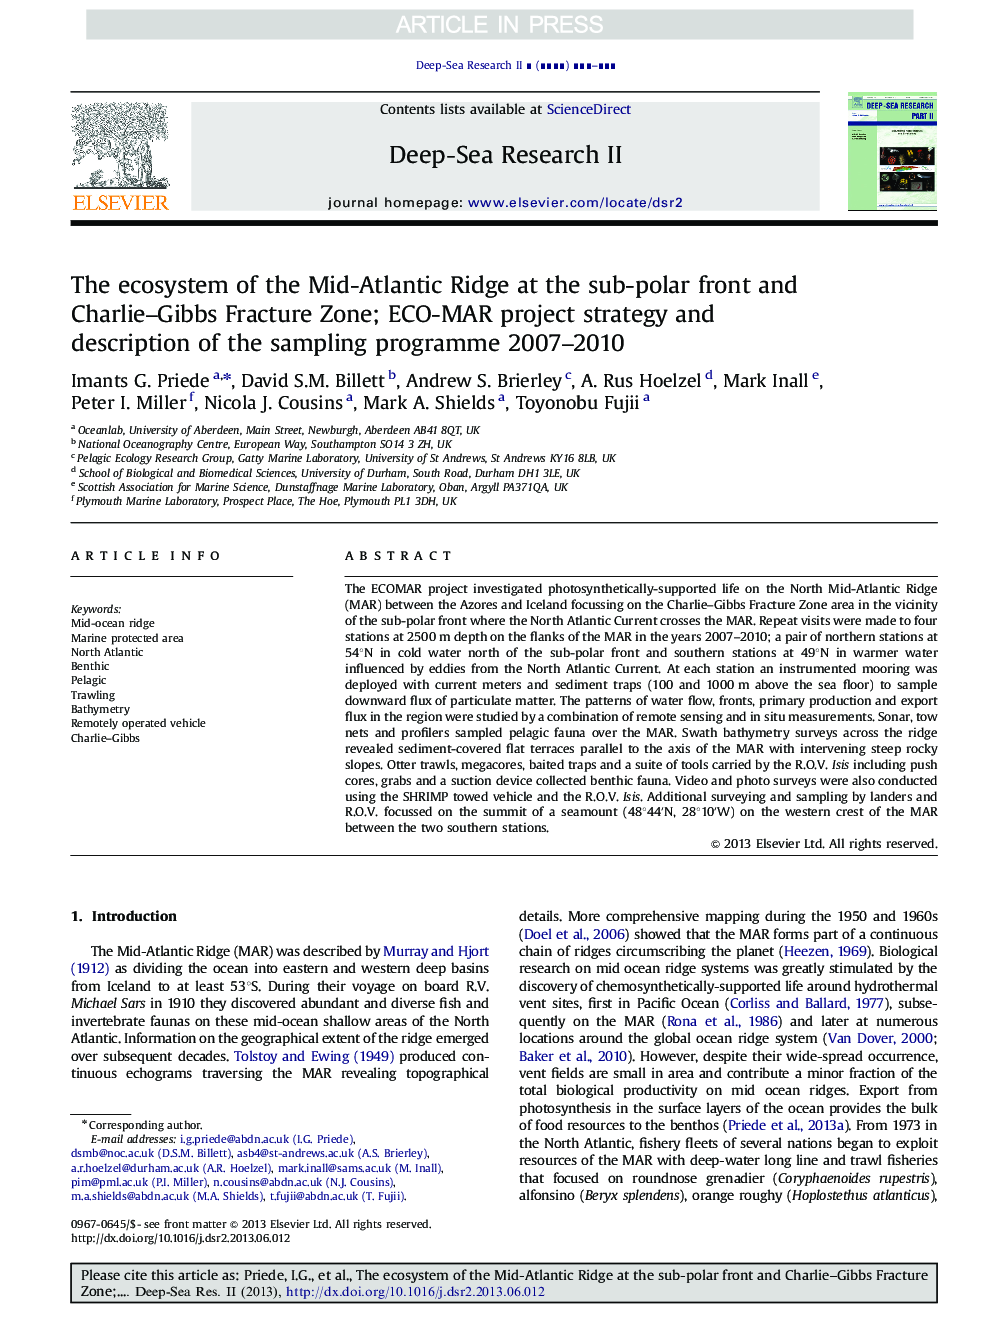 The ecosystem of the Mid-Atlantic Ridge at the sub-polar front and Charlie-Gibbs Fracture Zone; ECO-MAR project strategy and description of the sampling programme 2007-2010